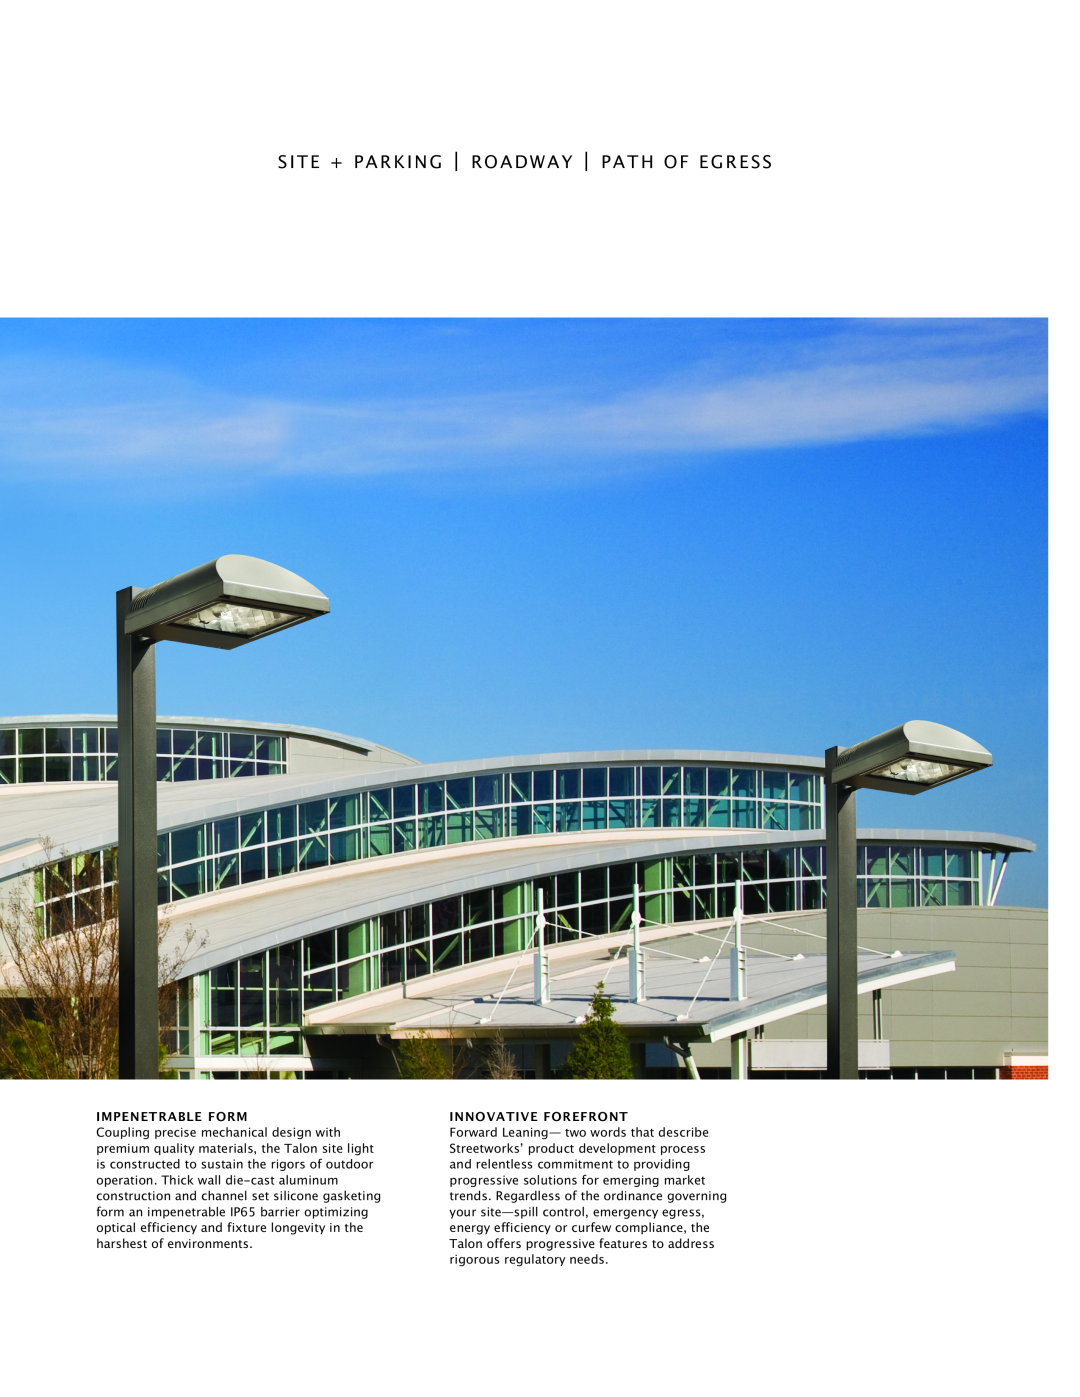 Cooper Lighting Area Luminaire manual Site + Parking | Roadway | Path Of Egress, Impenetrable Form, Innovative Forefront 